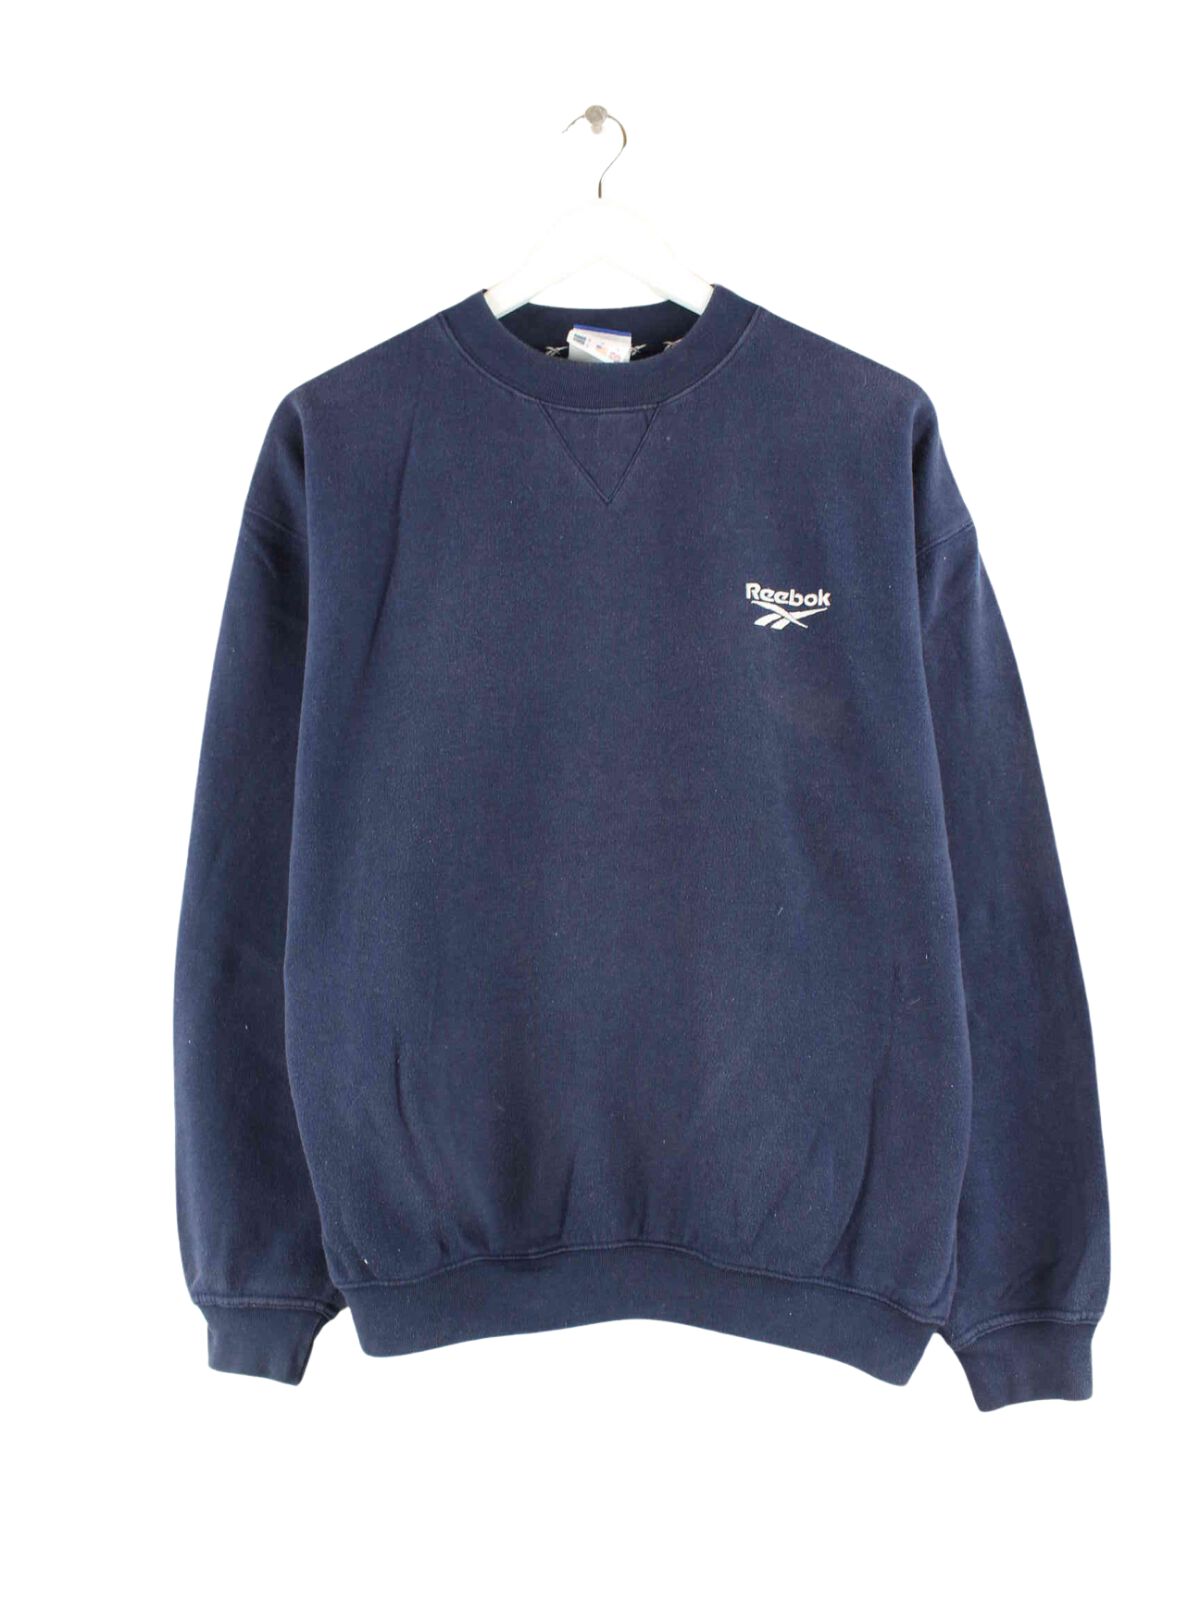 Reebok y2k Embroidered Sweater Blau M (front image)